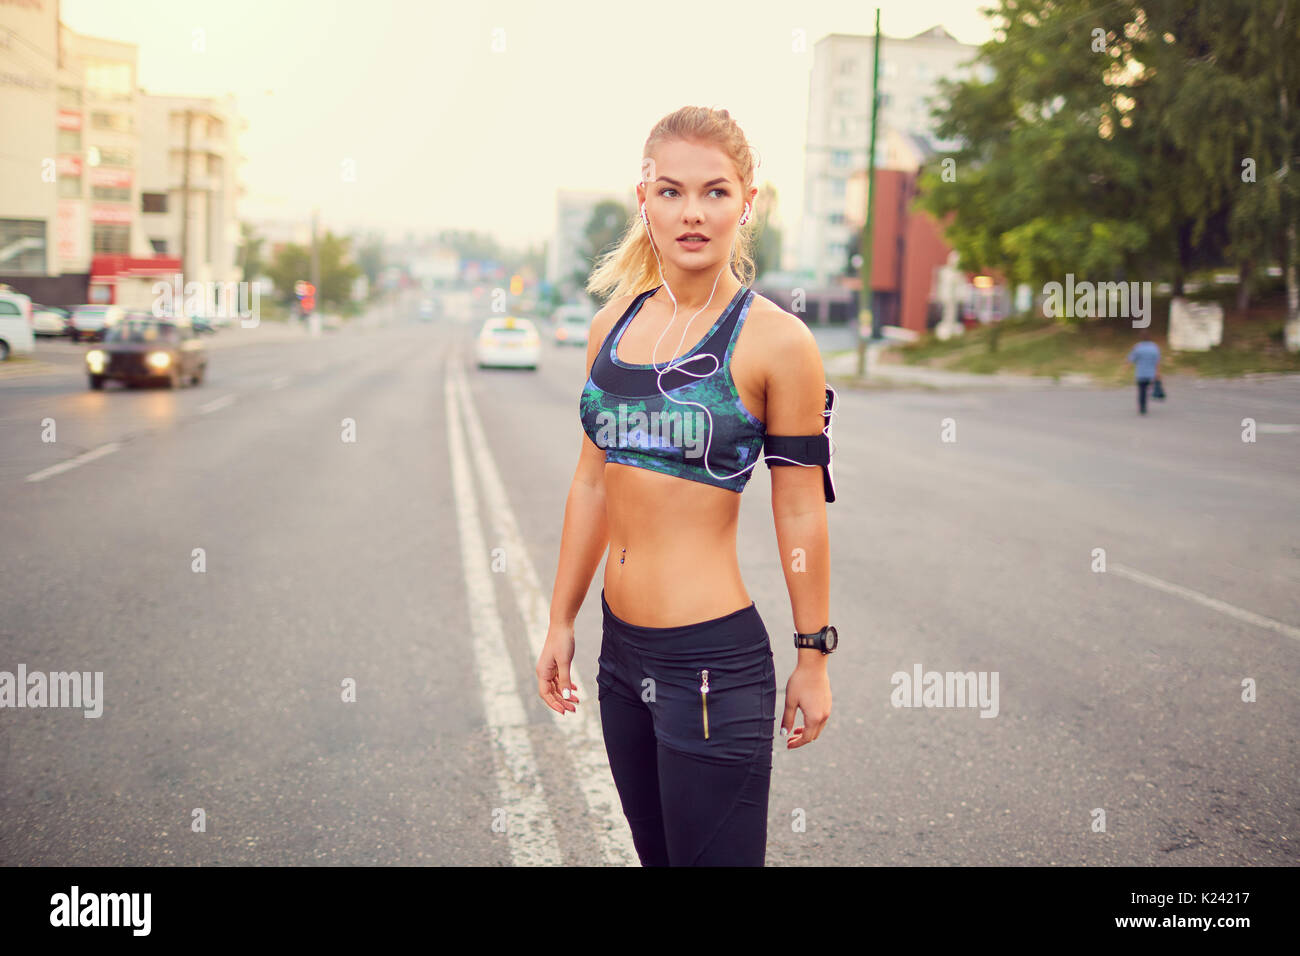 Sporty girl runner on the road in the city streets. Stock Photo